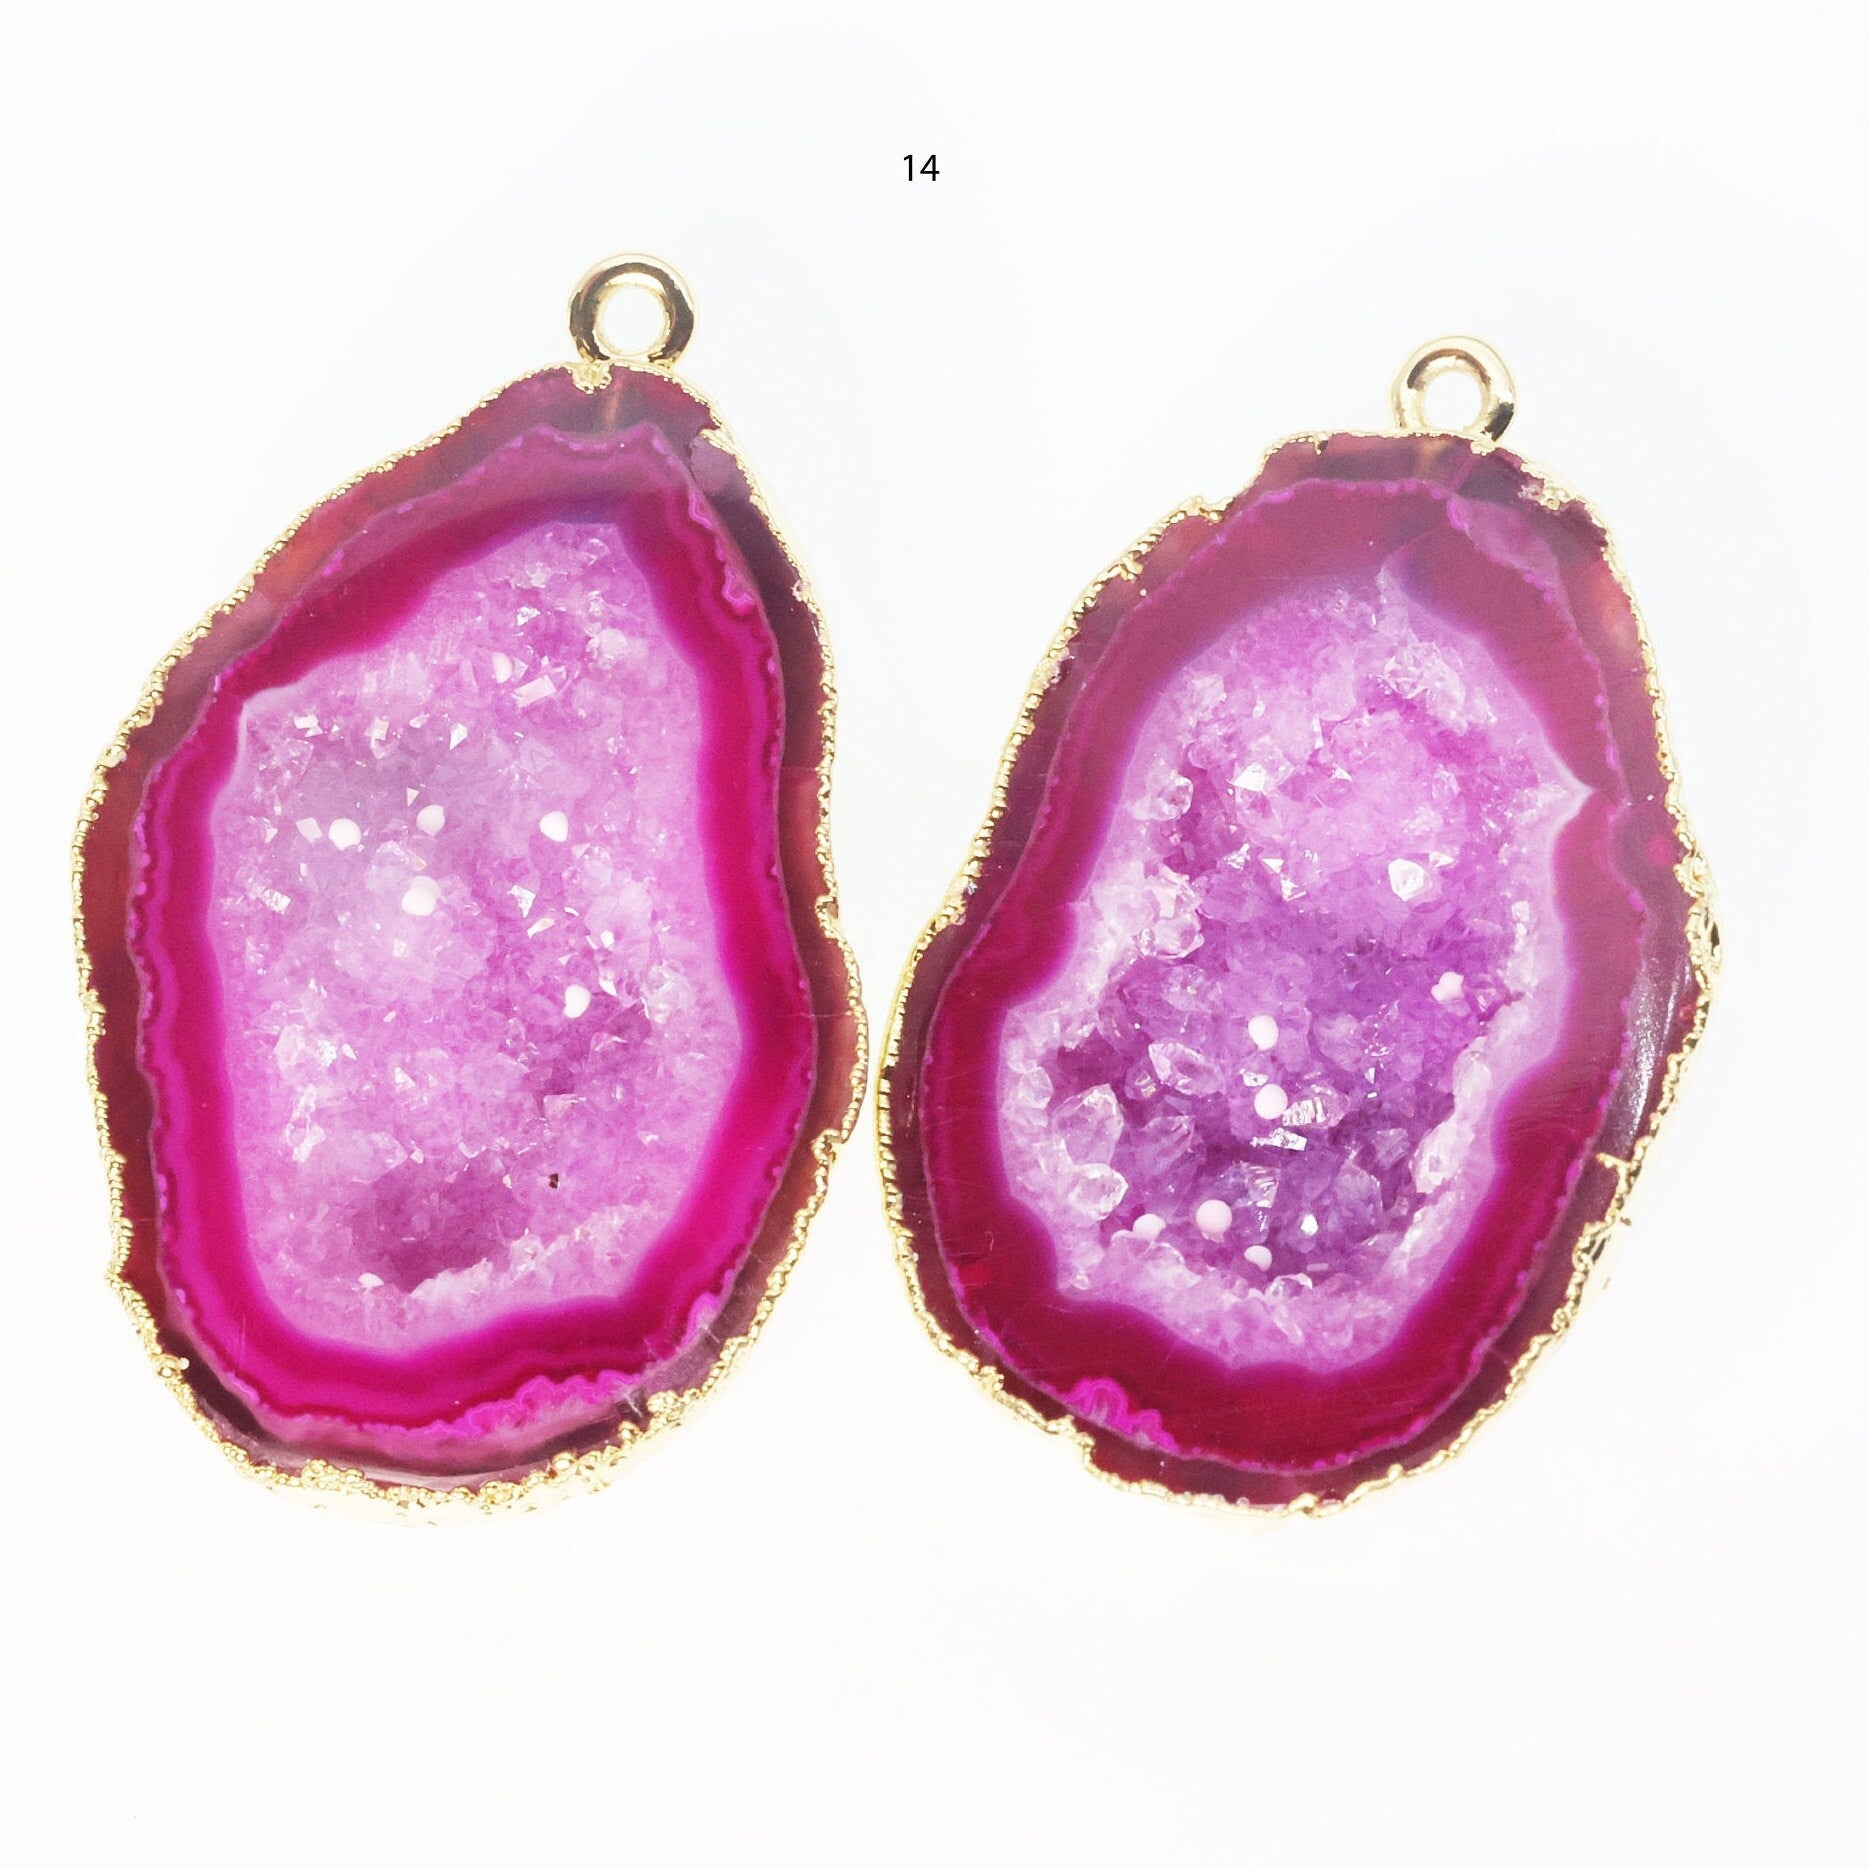 Gold Edged Fuscia cave druzy or tobasco druzy geode Pairs For Earrings *Order Exact Pairs as in Photos* - Meena Design